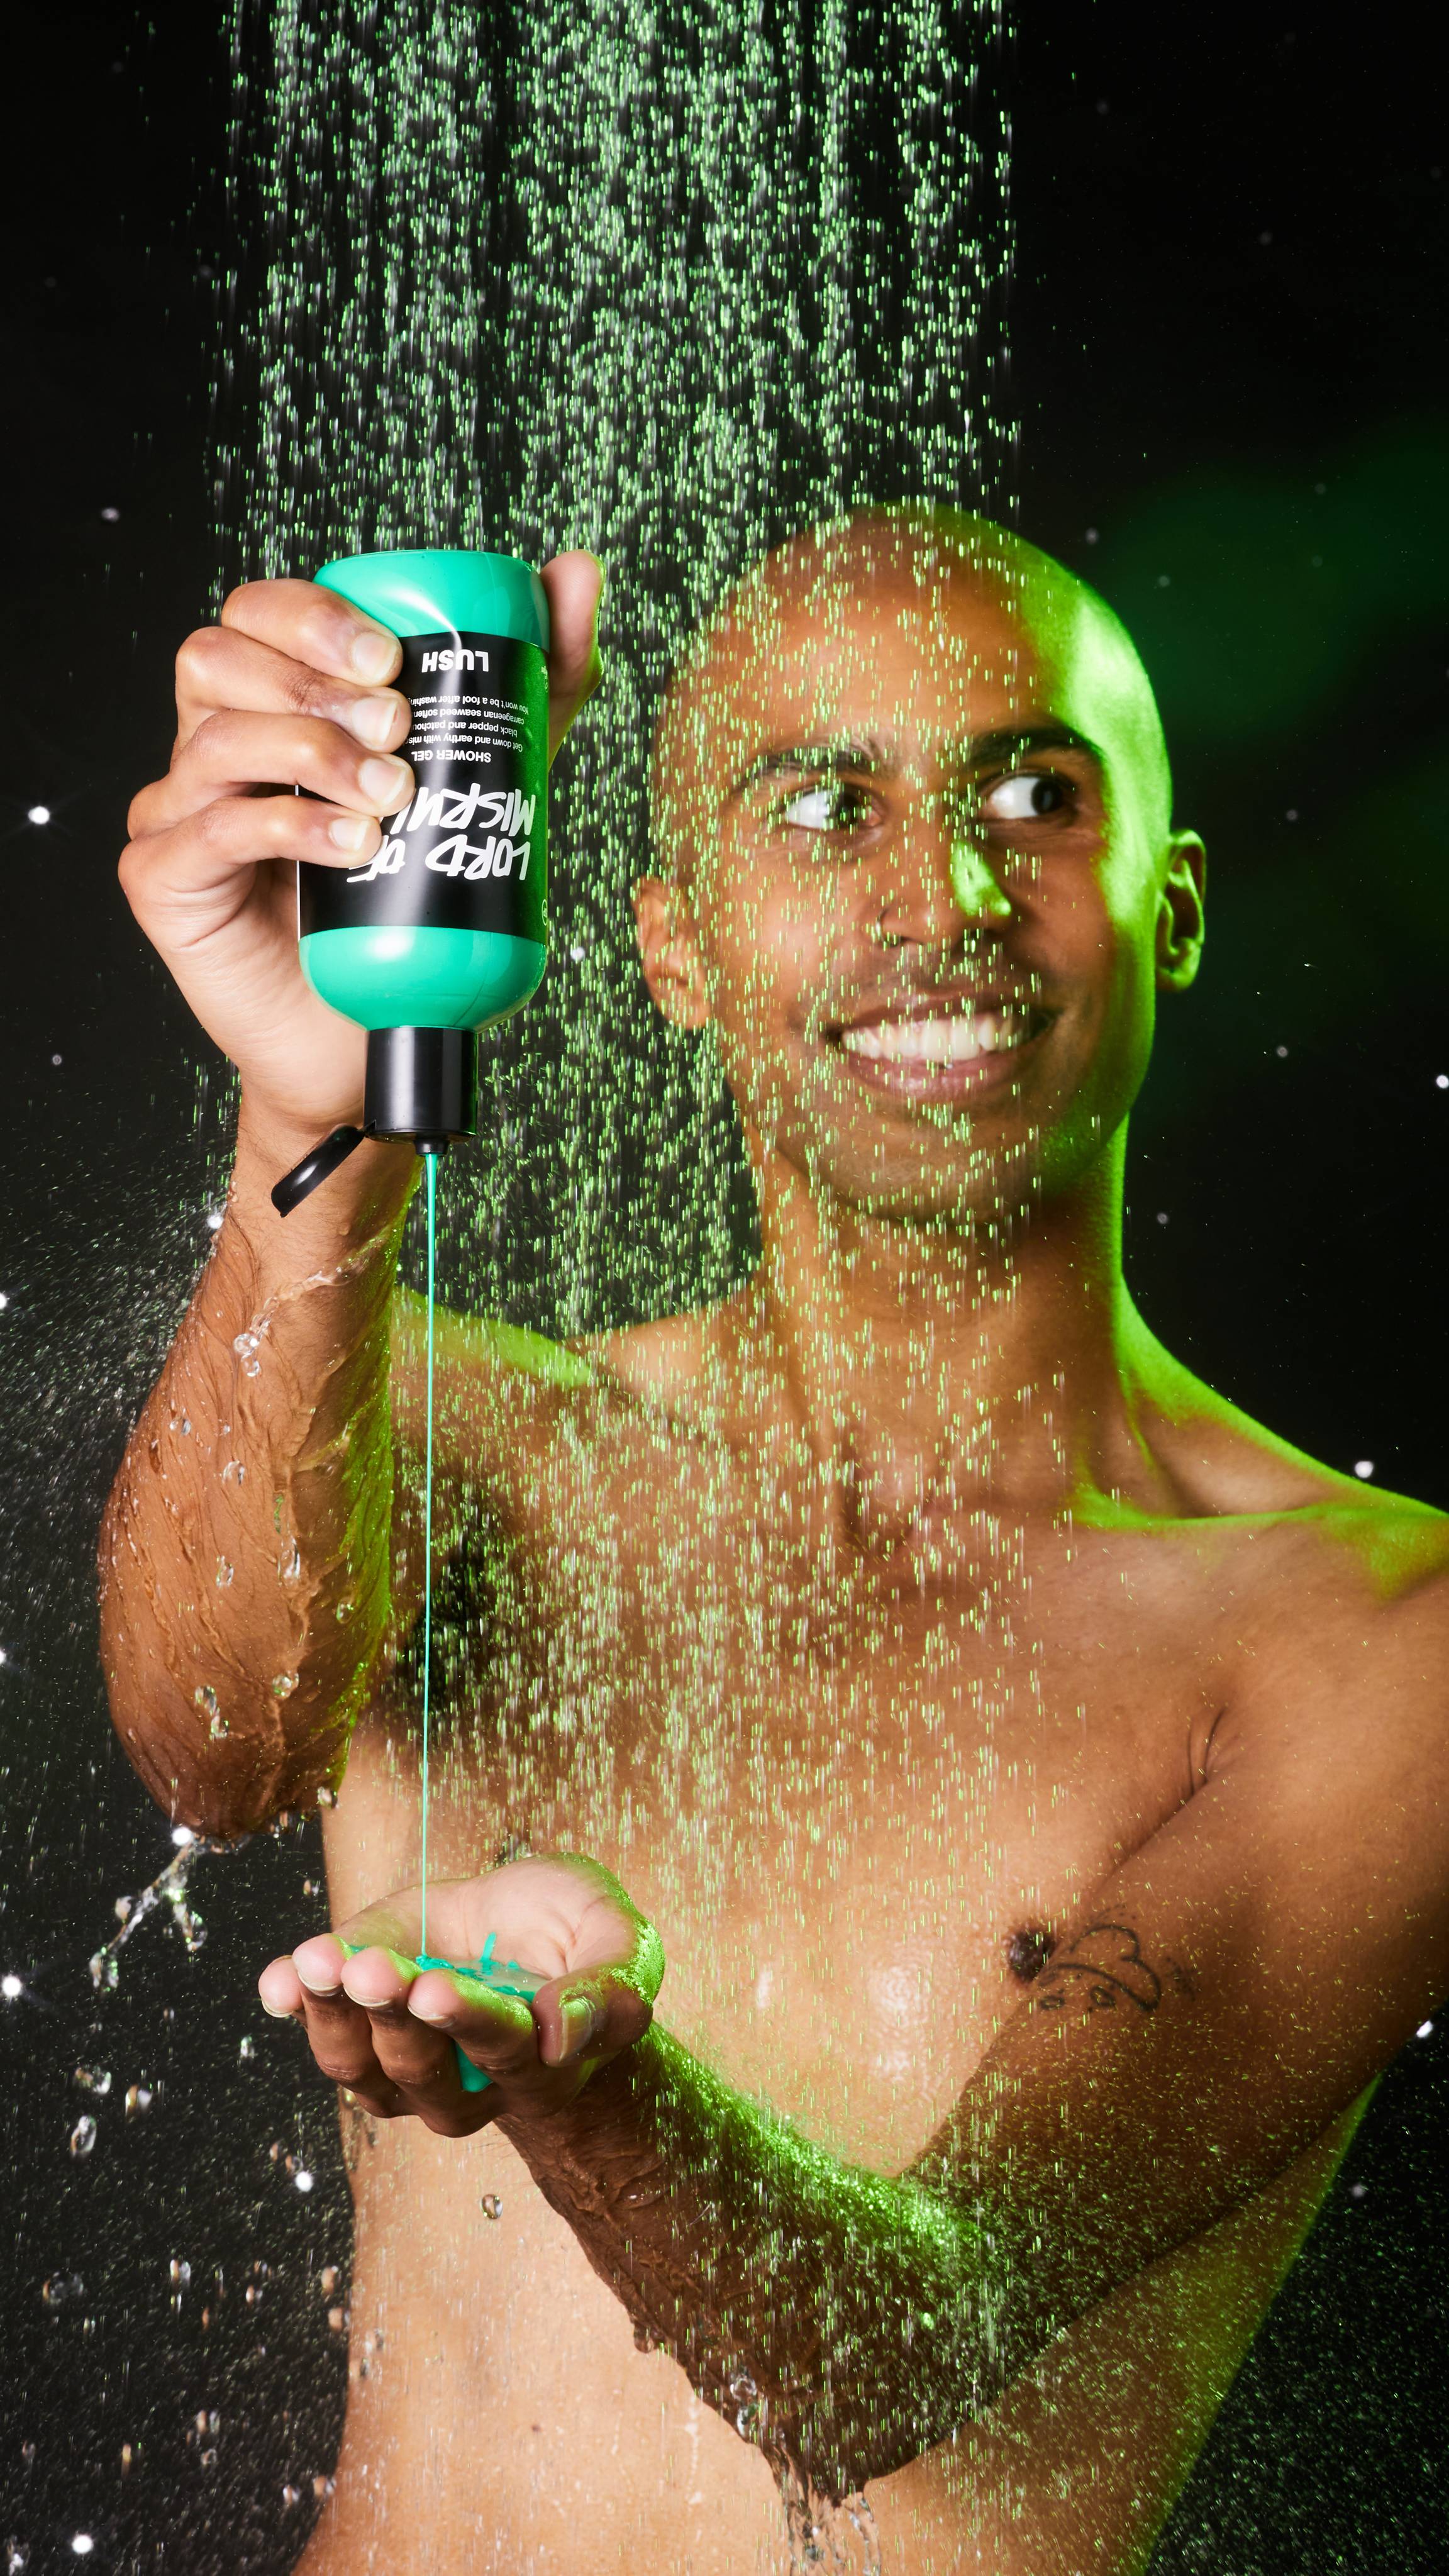 Image shows model in the shower squeezing the shower gel from the bottle into their hand on an emerald-green background.